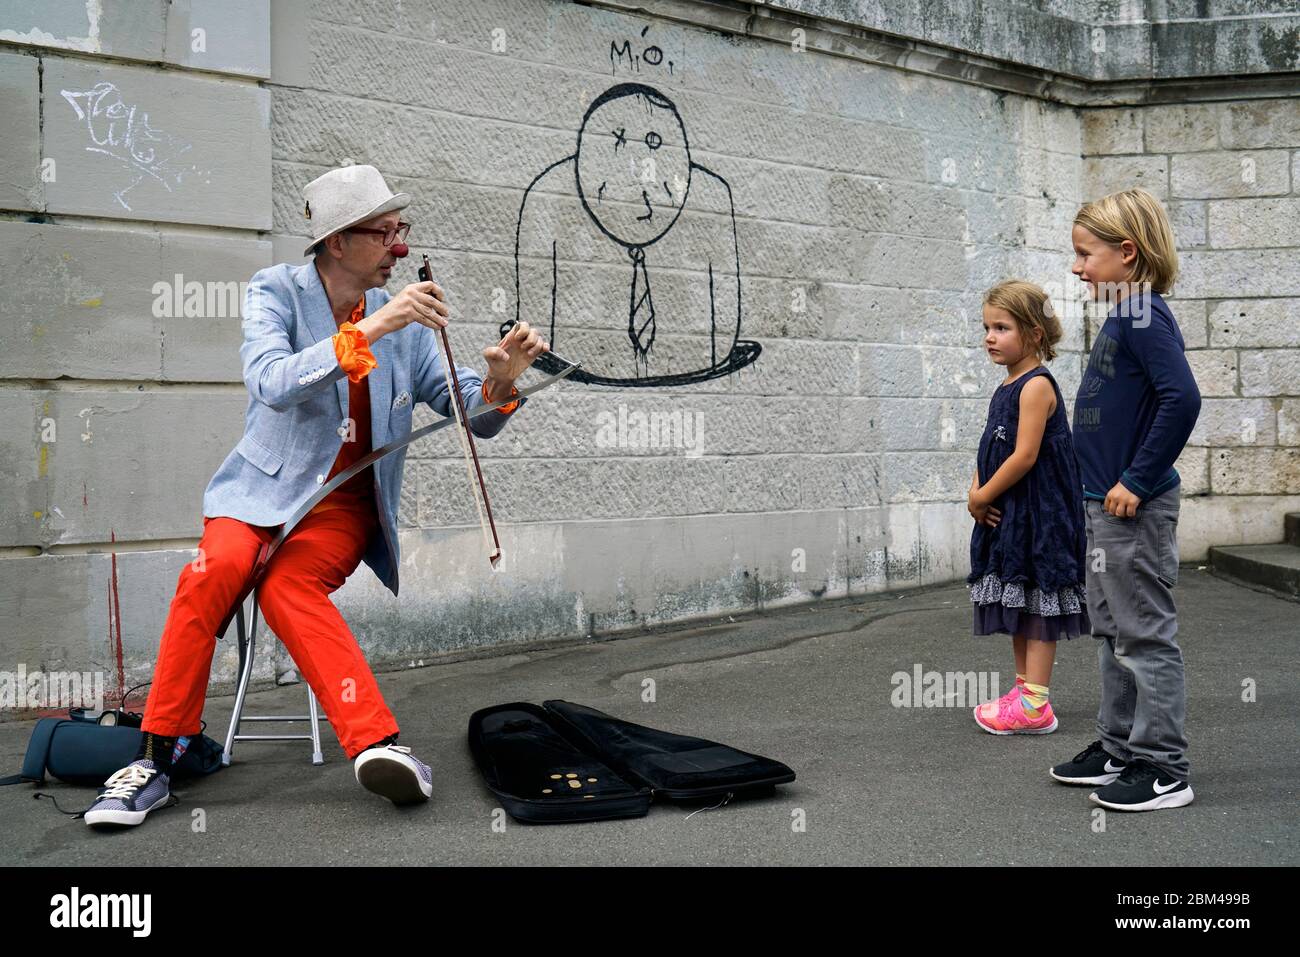 A street performer clown playing music for children in Montmartre.Paris.France Stock Photo